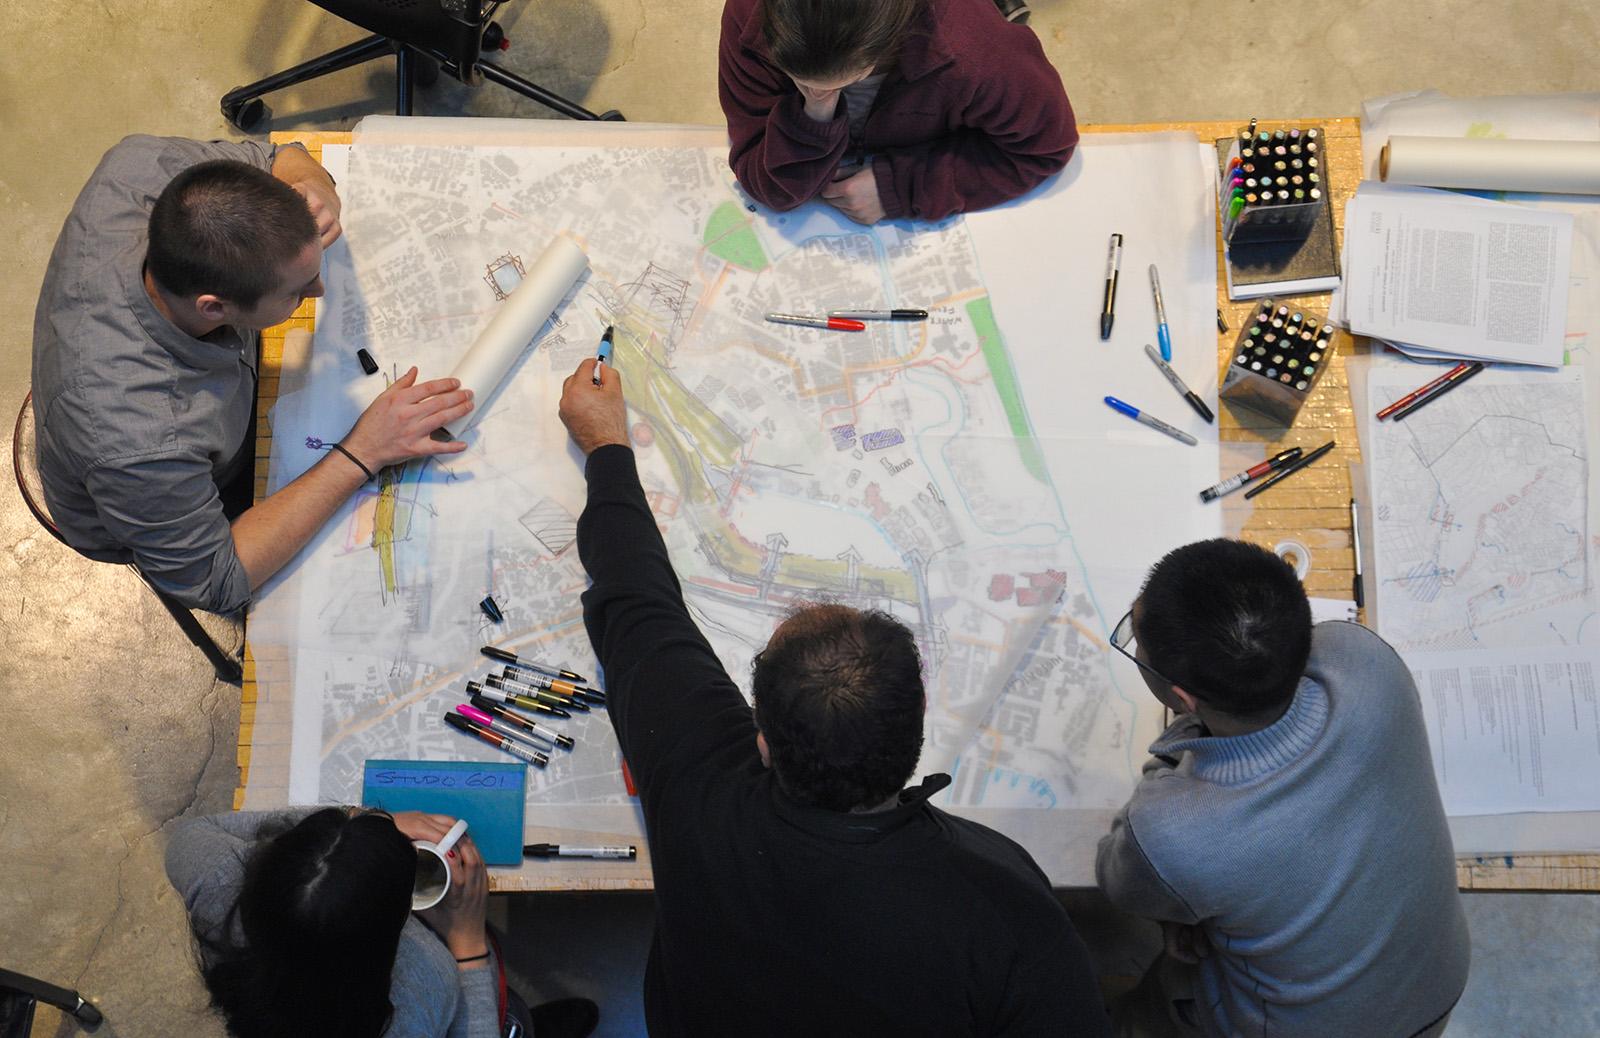 Students working on an urban design plan project